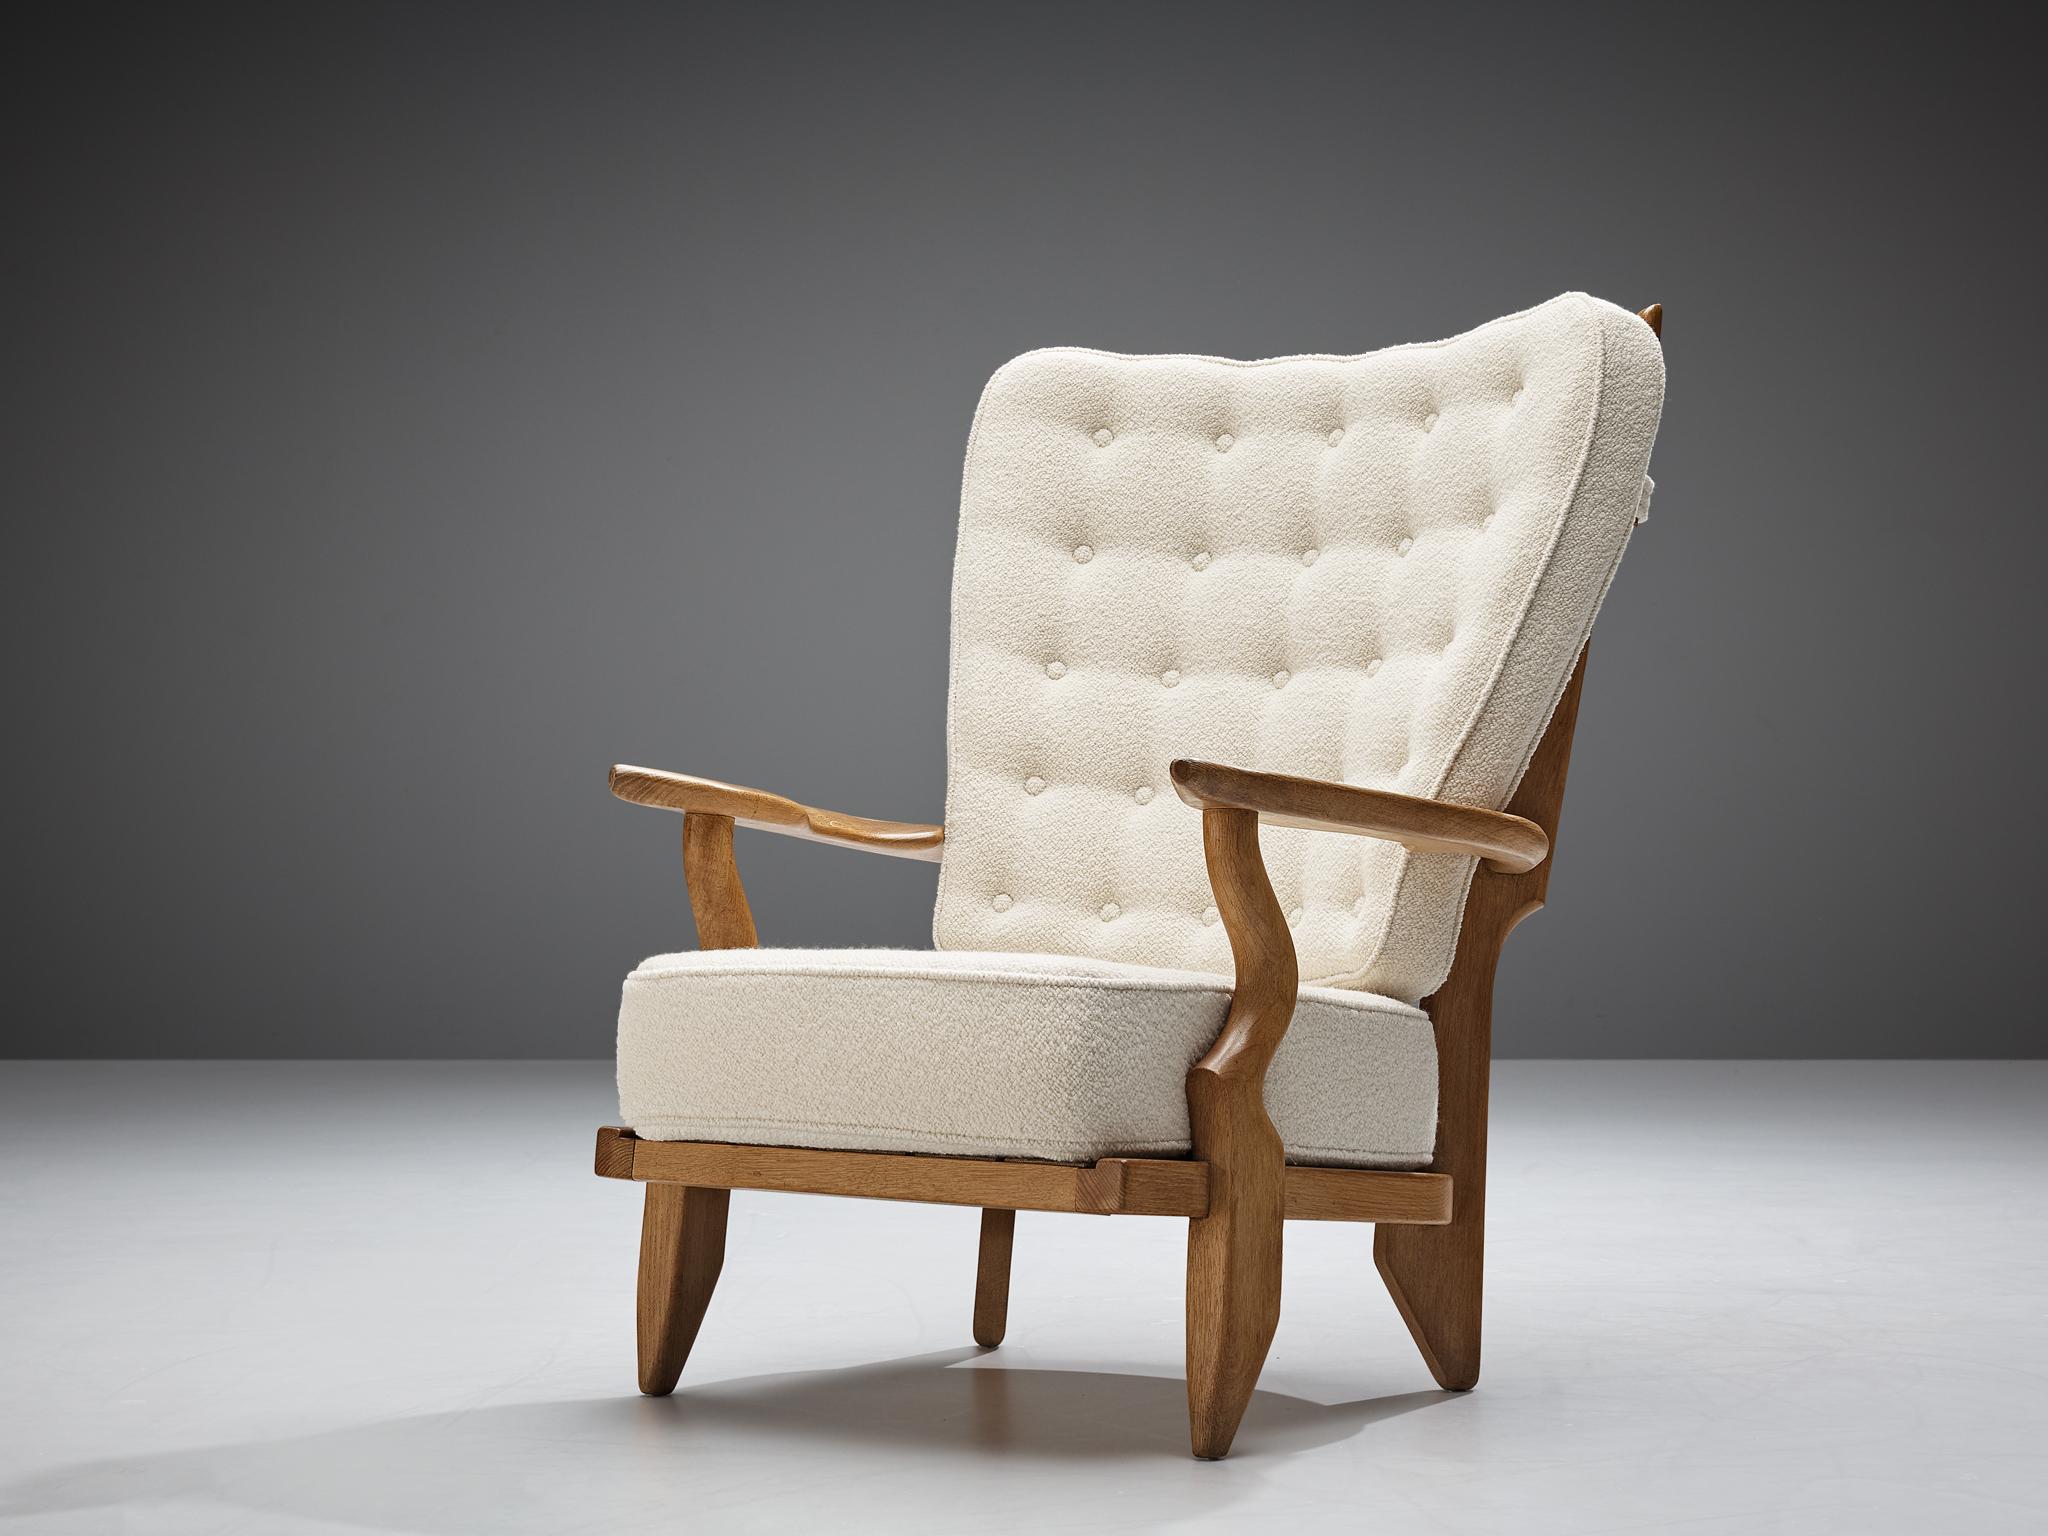 Guillerme et Chambron, customizable 'Grand Repos' lounge chair oak, white woolen Pierre Frey upholstery, oak, France, 1960s.

Guillerme and Chambron are known for their high quality solid oak furniture, from which this is another great example.